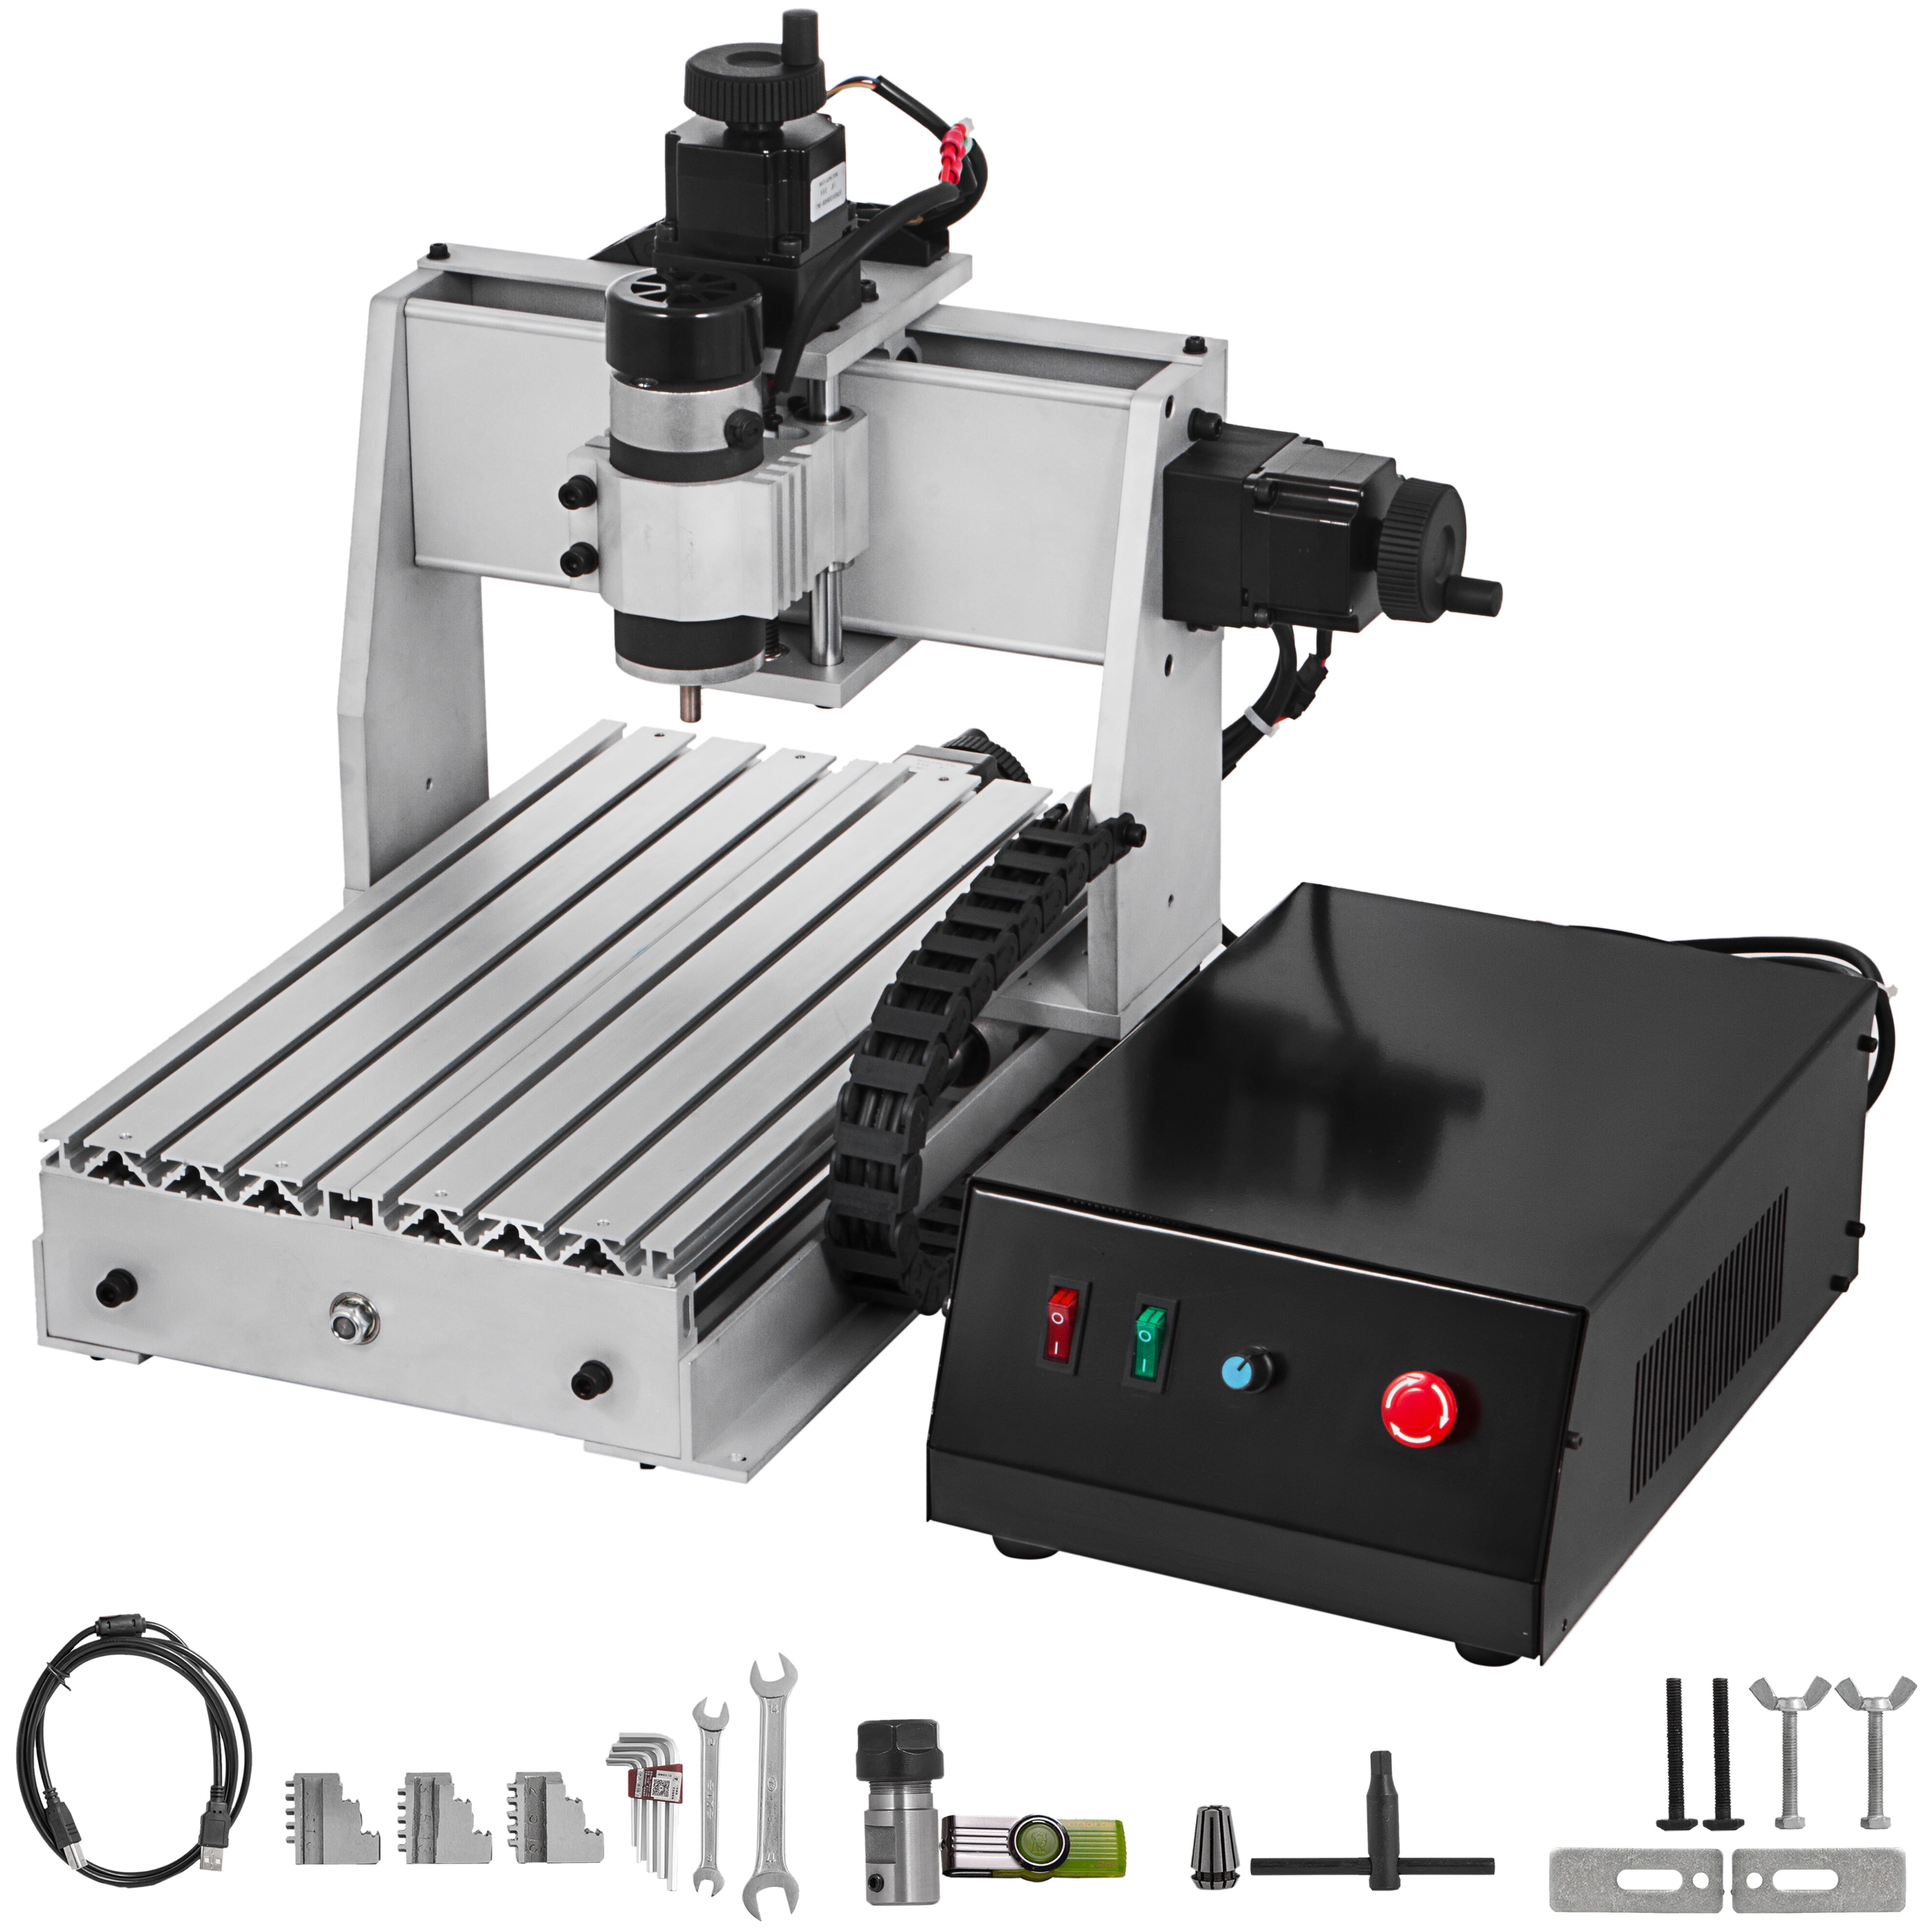 3020 3 Axis with USB VEVOR CNC Router 3020 3 Axis CNC Router Machine 300x200mm CNC Router Kit 200W MACH3 Control Large 3D Engraving Machine CNC Router Kit with USB